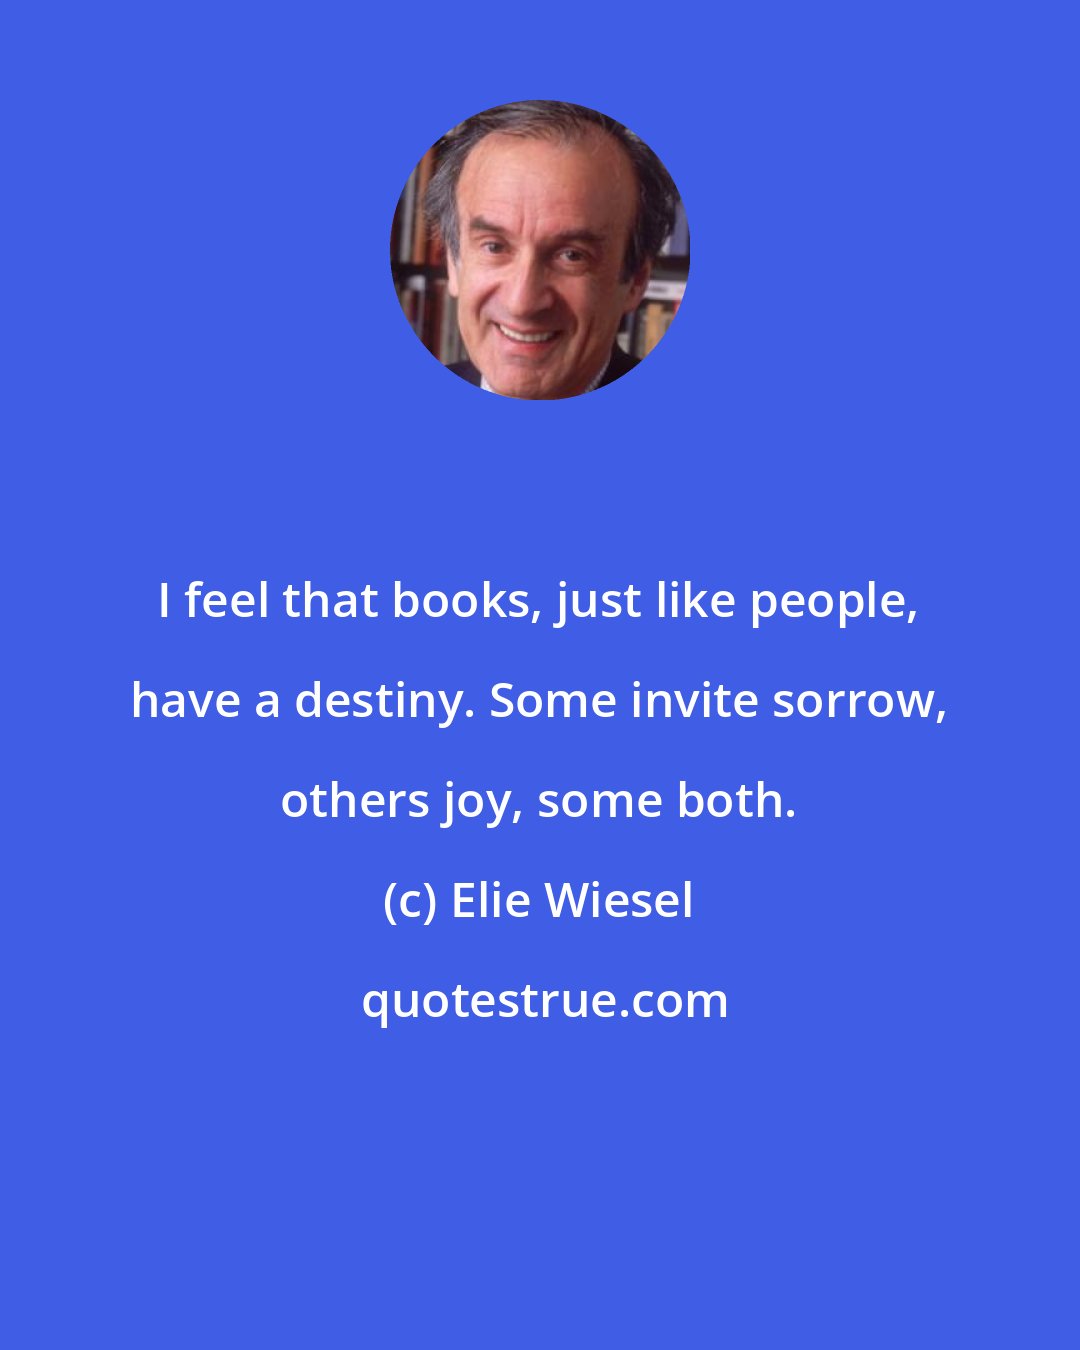 Elie Wiesel: I feel that books, just like people, have a destiny. Some invite sorrow, others joy, some both.